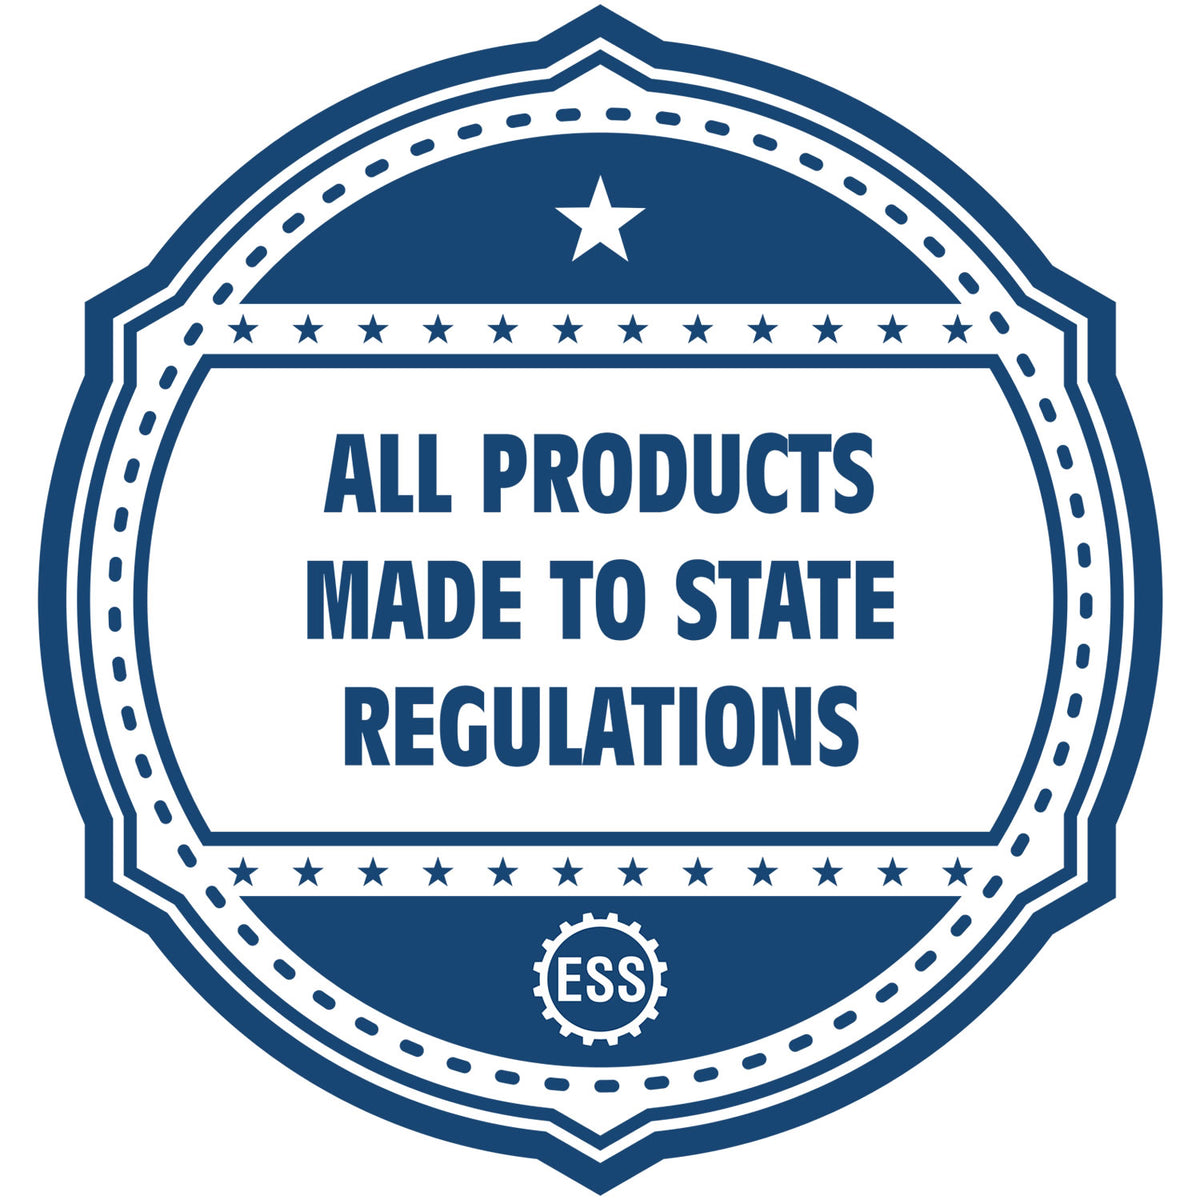 An icon or badge element for the Extended Long Reach Florida Architect Seal Embosser showing that this product is made in compliance with state regulations.